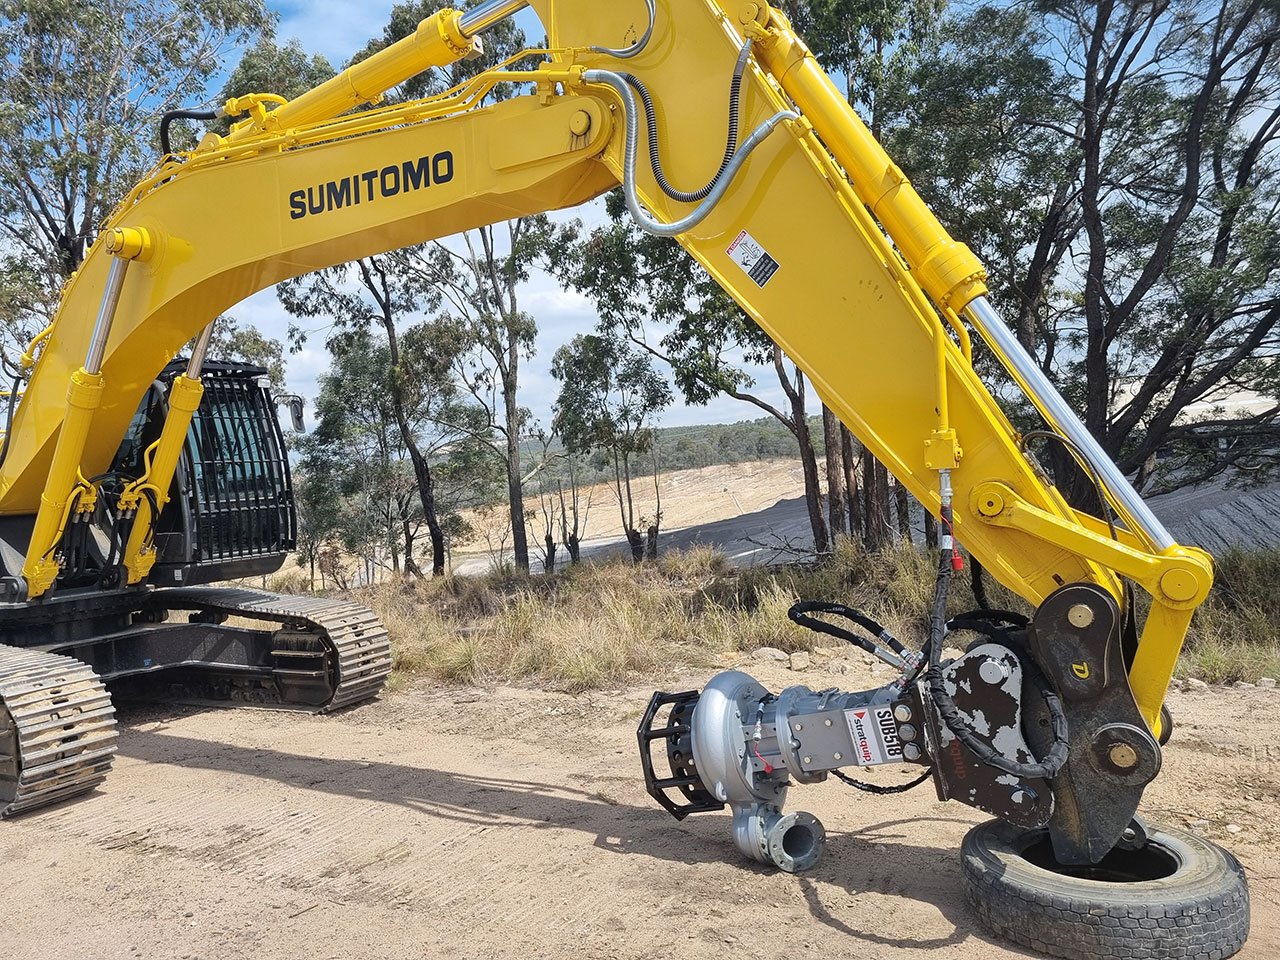 Dredge pump connected to excavator showing extended arm picture